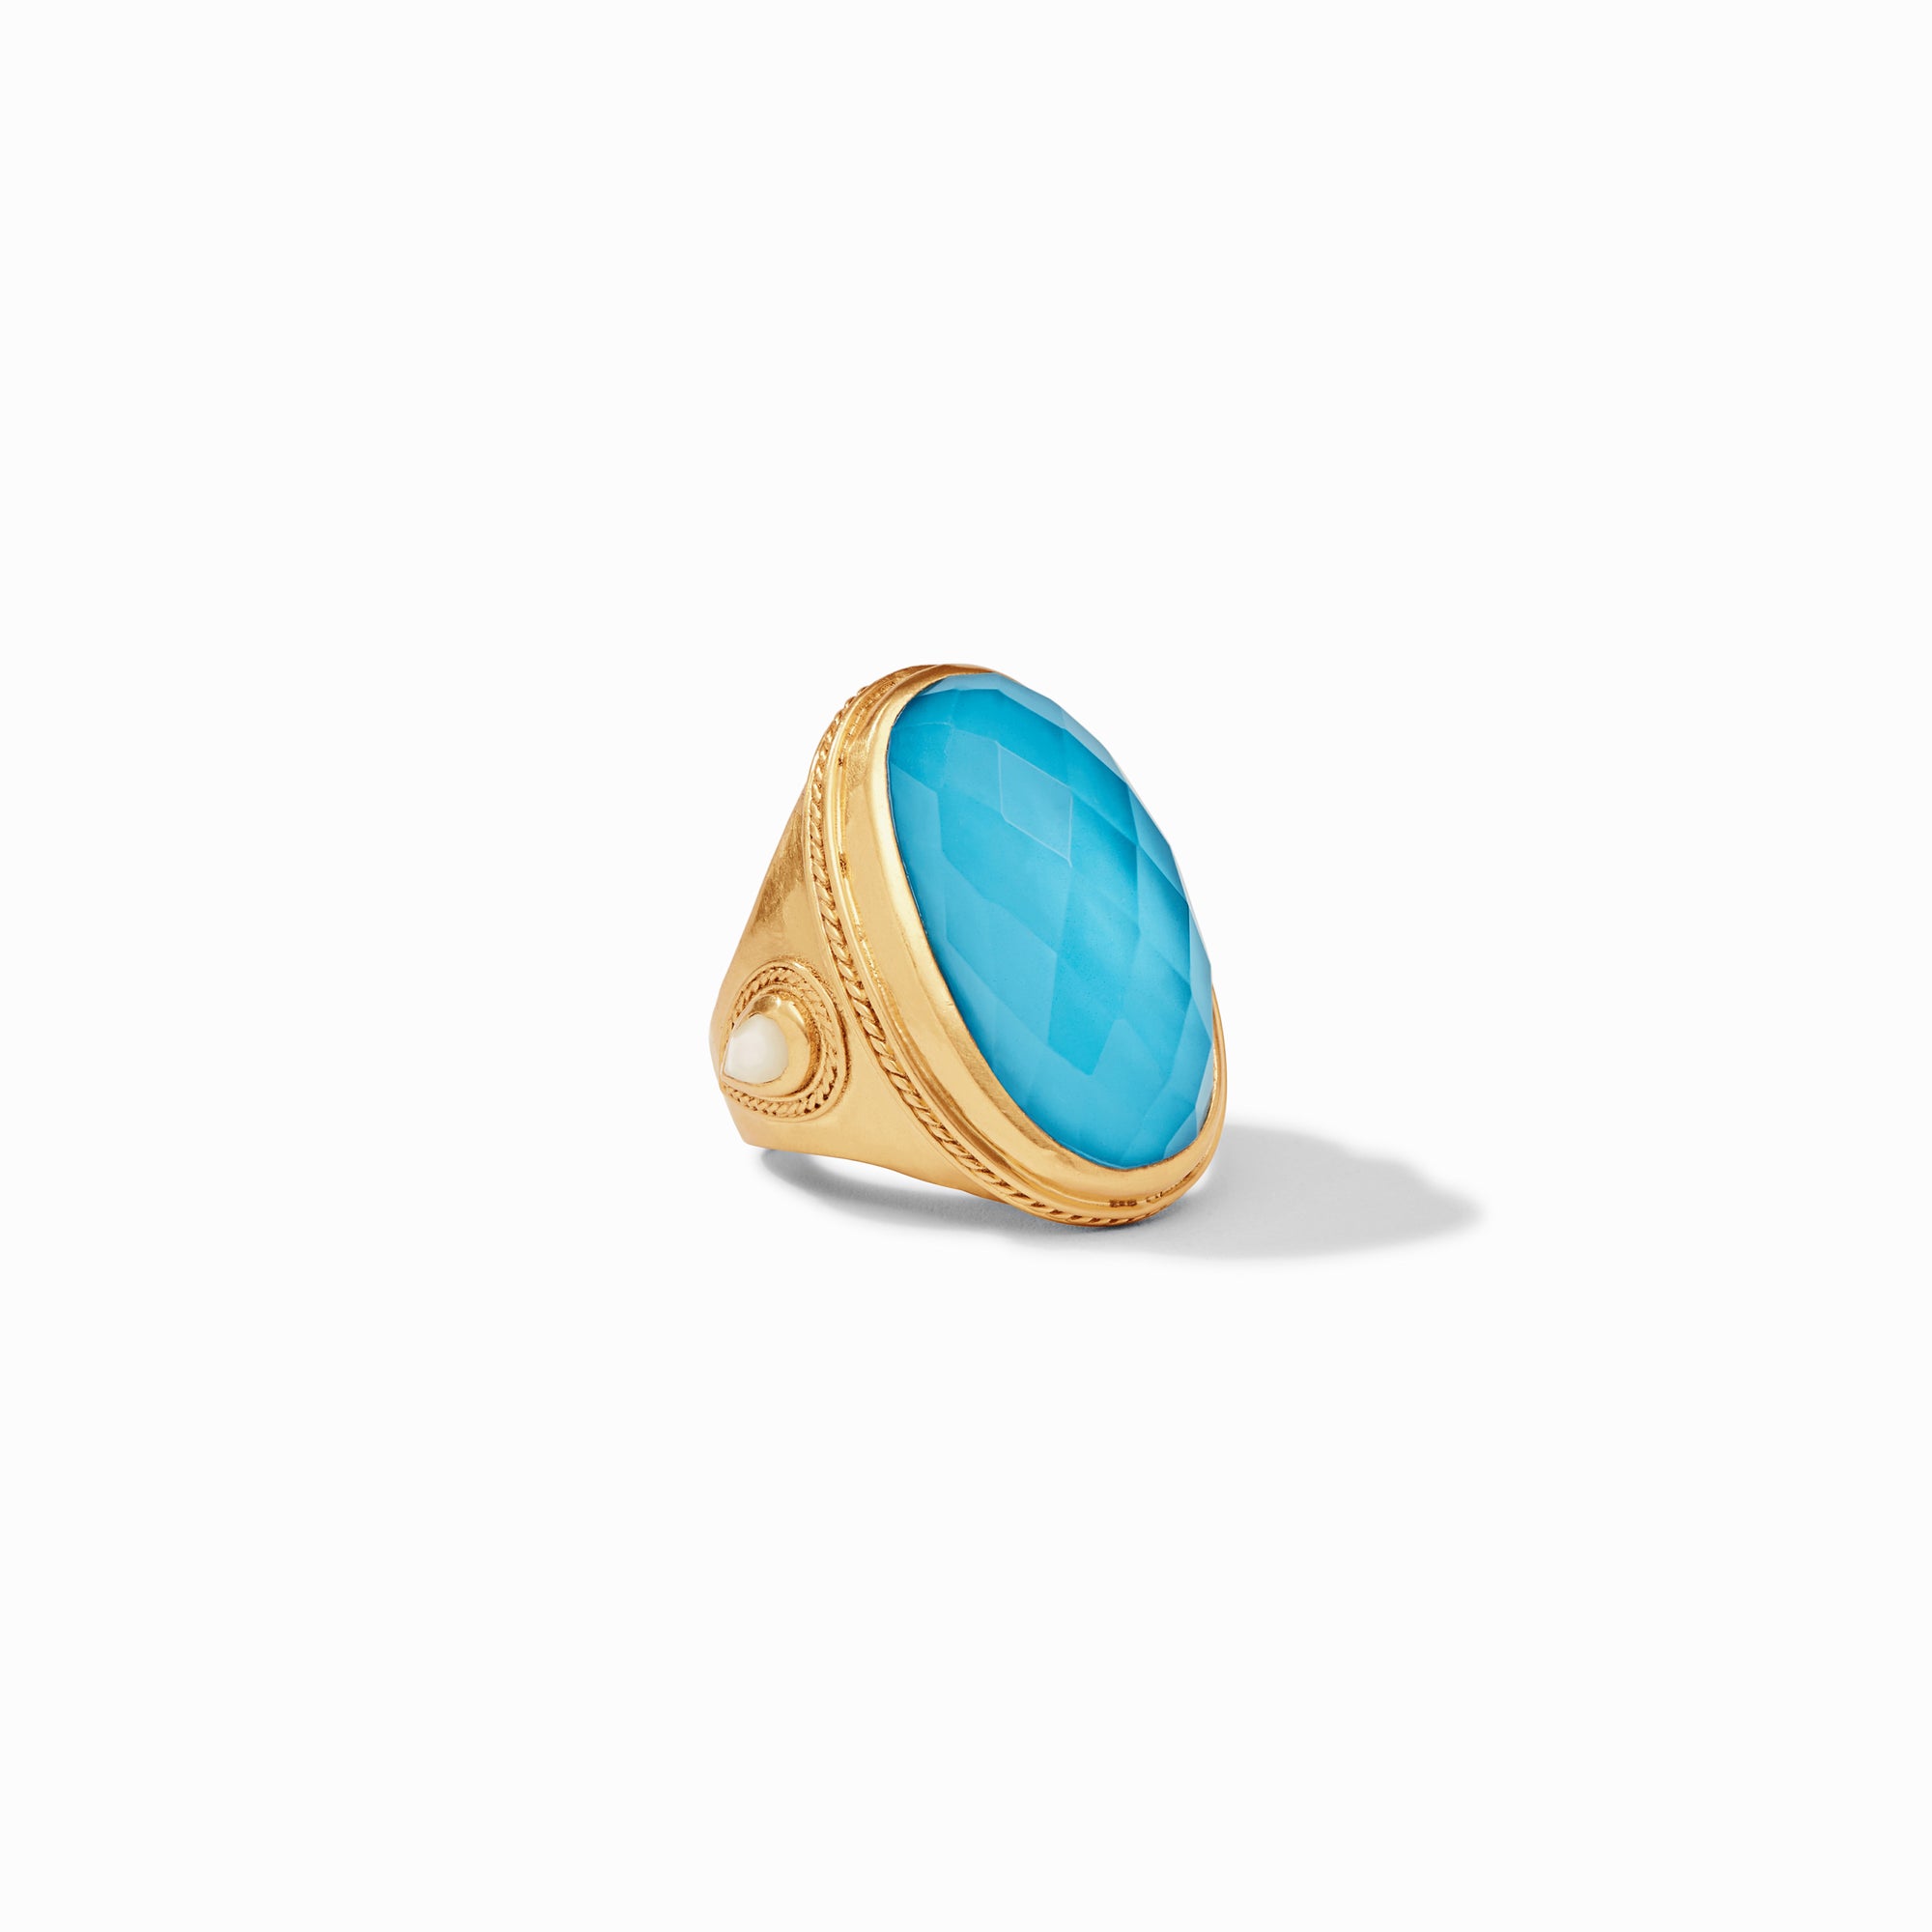 Julie Vos - Cassis Statement Ring, Iridescent Pacific Blue / 7, Iridescent Pacific Blue, summer in pacific blue, perfect pairings, best seller, fern collection